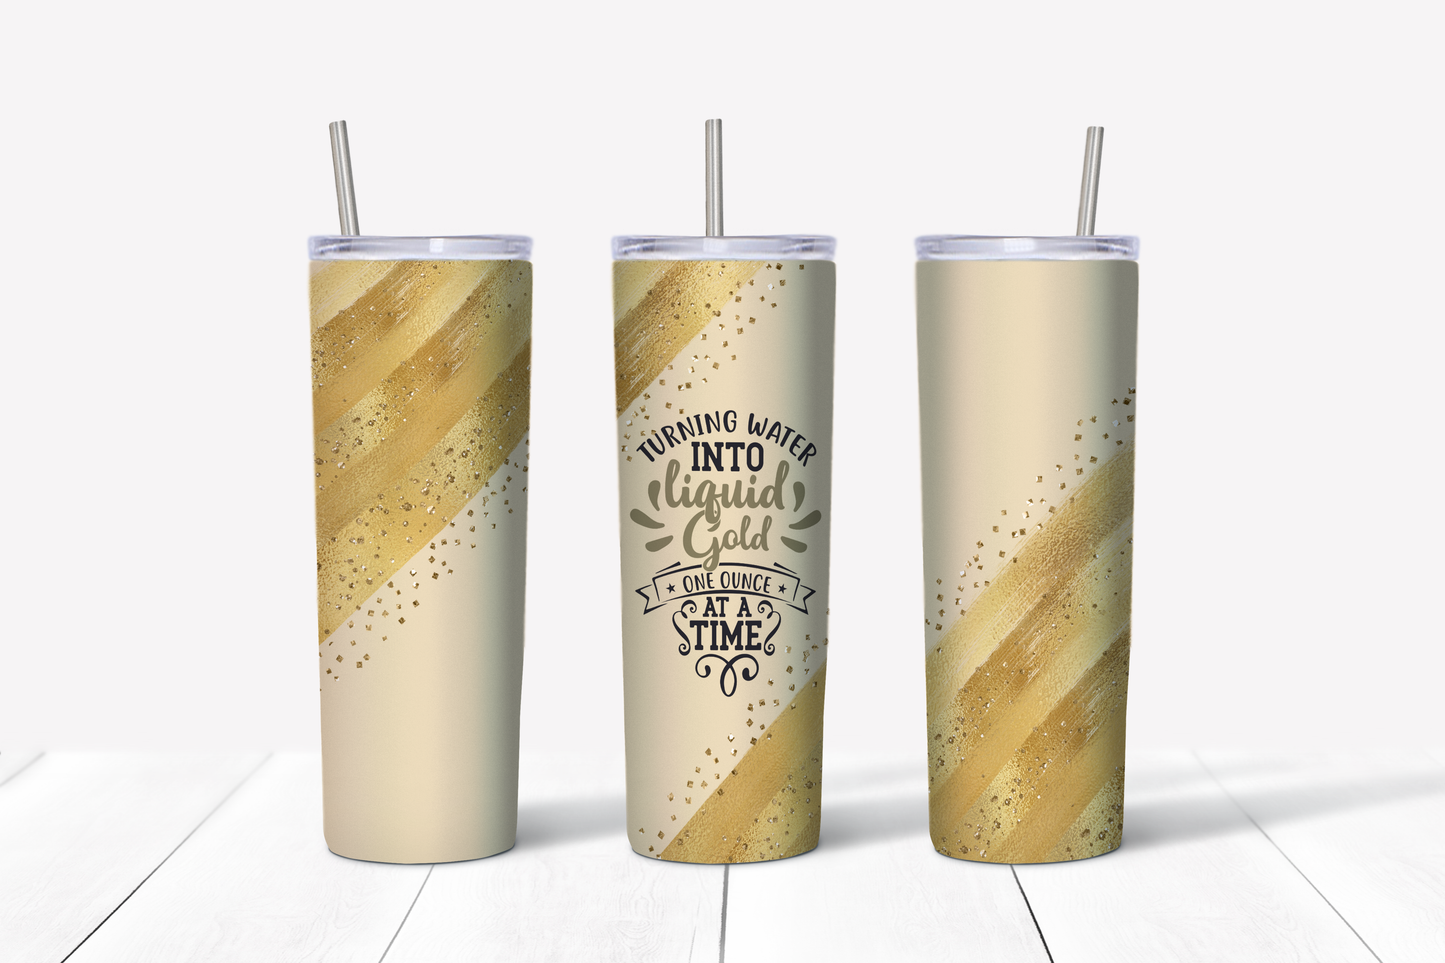 Turning Water into Liquid Gold One Ounce at a Time 20 oz Tumbler